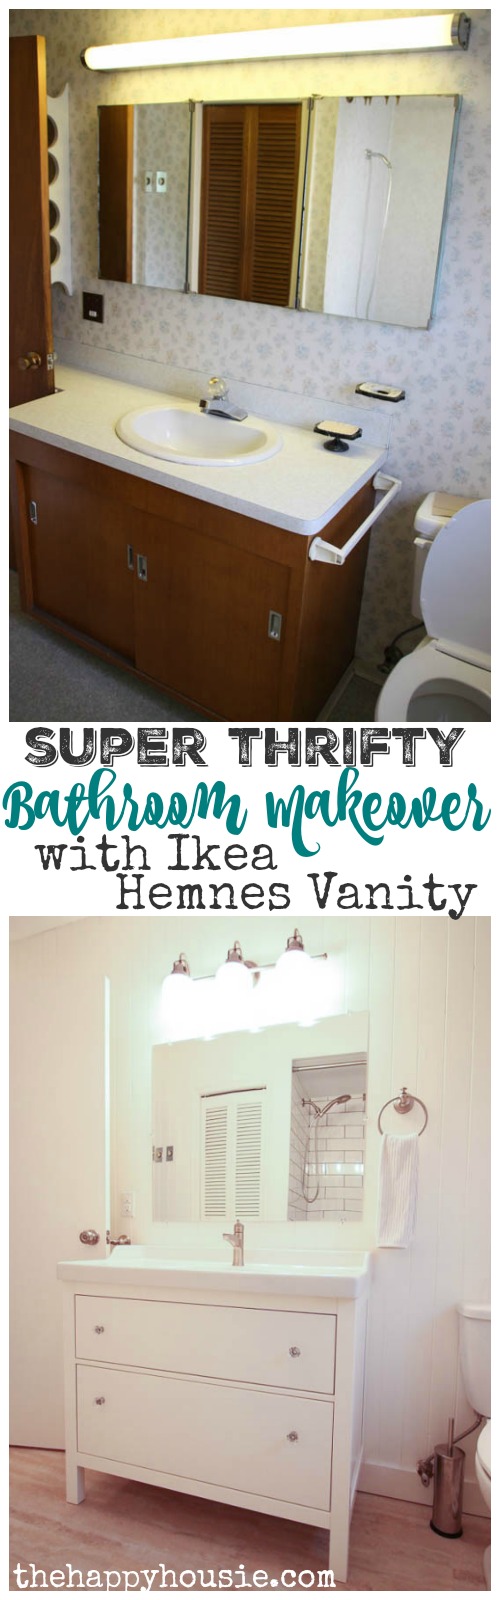 Thrifty Bathroom Makeover With An Ikea Hemnes Vanity The Happy